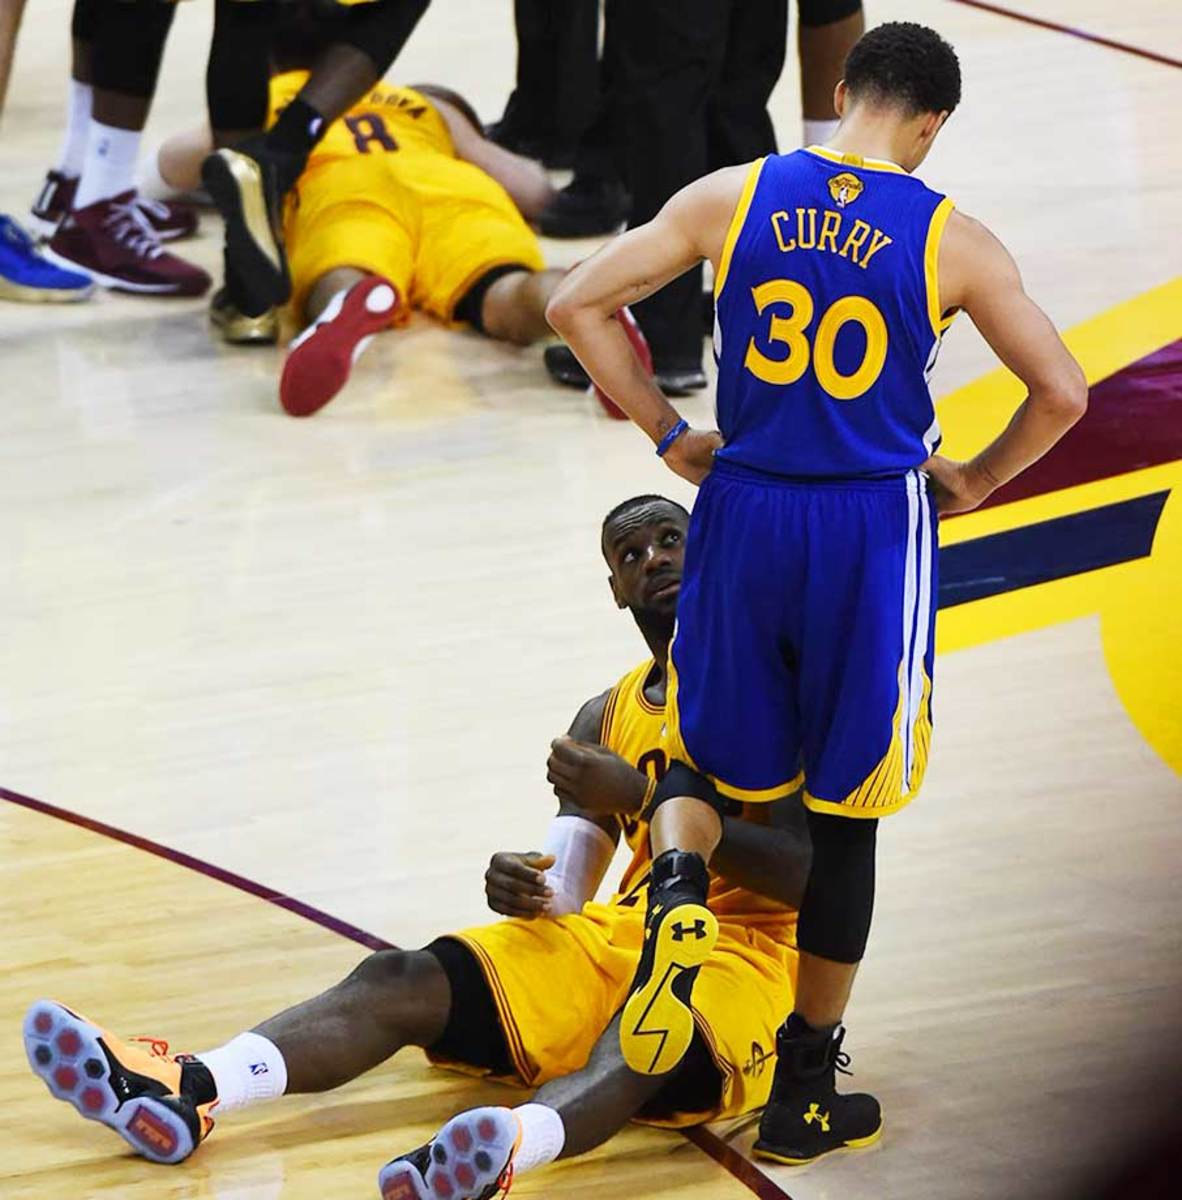 Golden State Warriors guard Stephen Curry (left) and then-Cleveland  Cavaliers forward LeBron James scramble for a loose ball during game 1 of  the 2016 NBA Finals. - WJCT Public Media